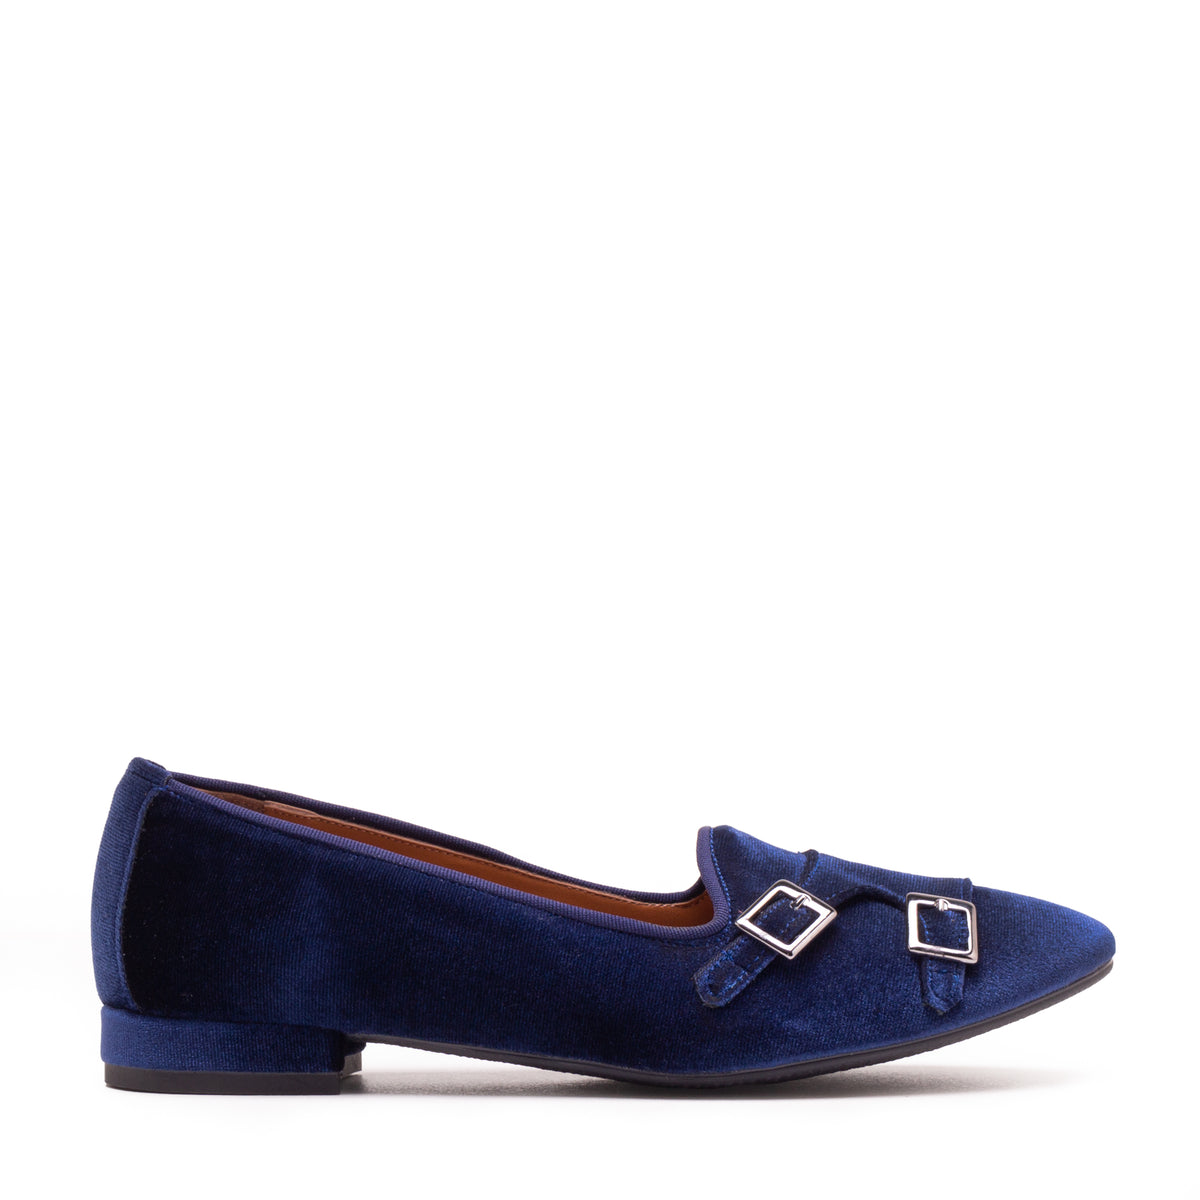 MARRAKECH LOAFERS